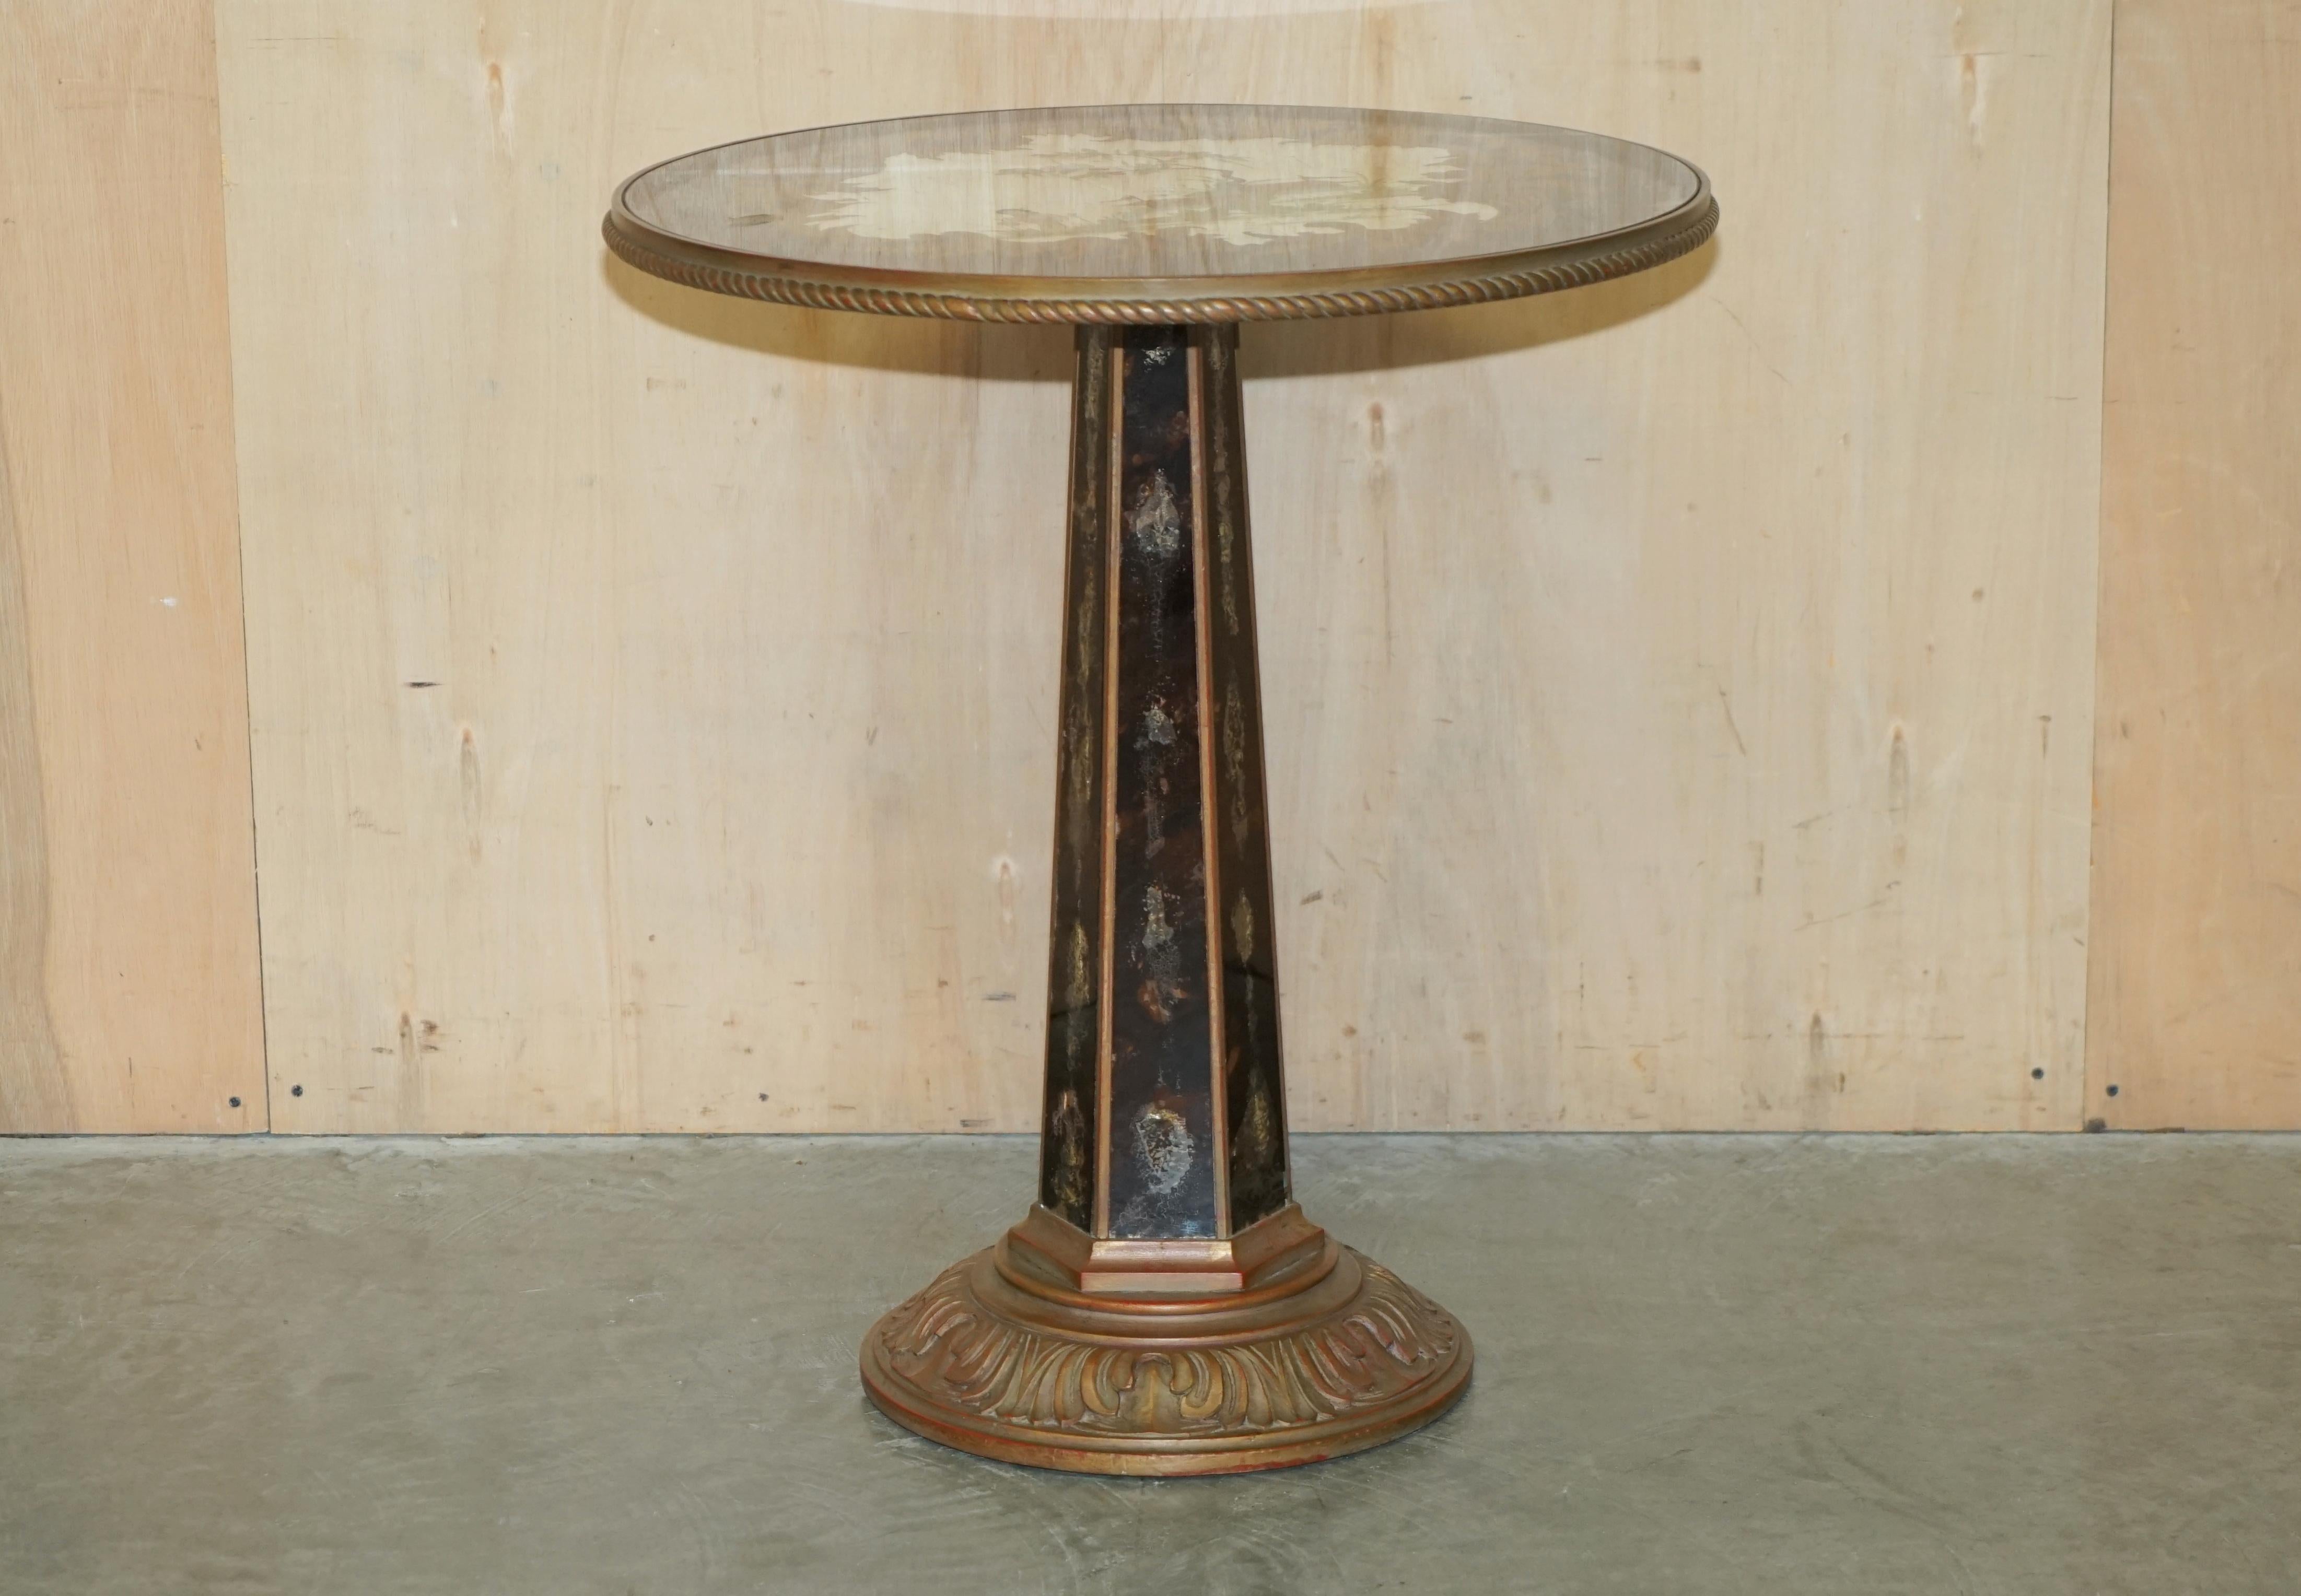 Royal House Antiques

Royal House Antiques is delighted to offer for sale this lovely circa 1920 hand made Chinese Chinoiserie occasional center table

Please note the delivery fee listed is just a guide, it covers within the M25 only for the UK and